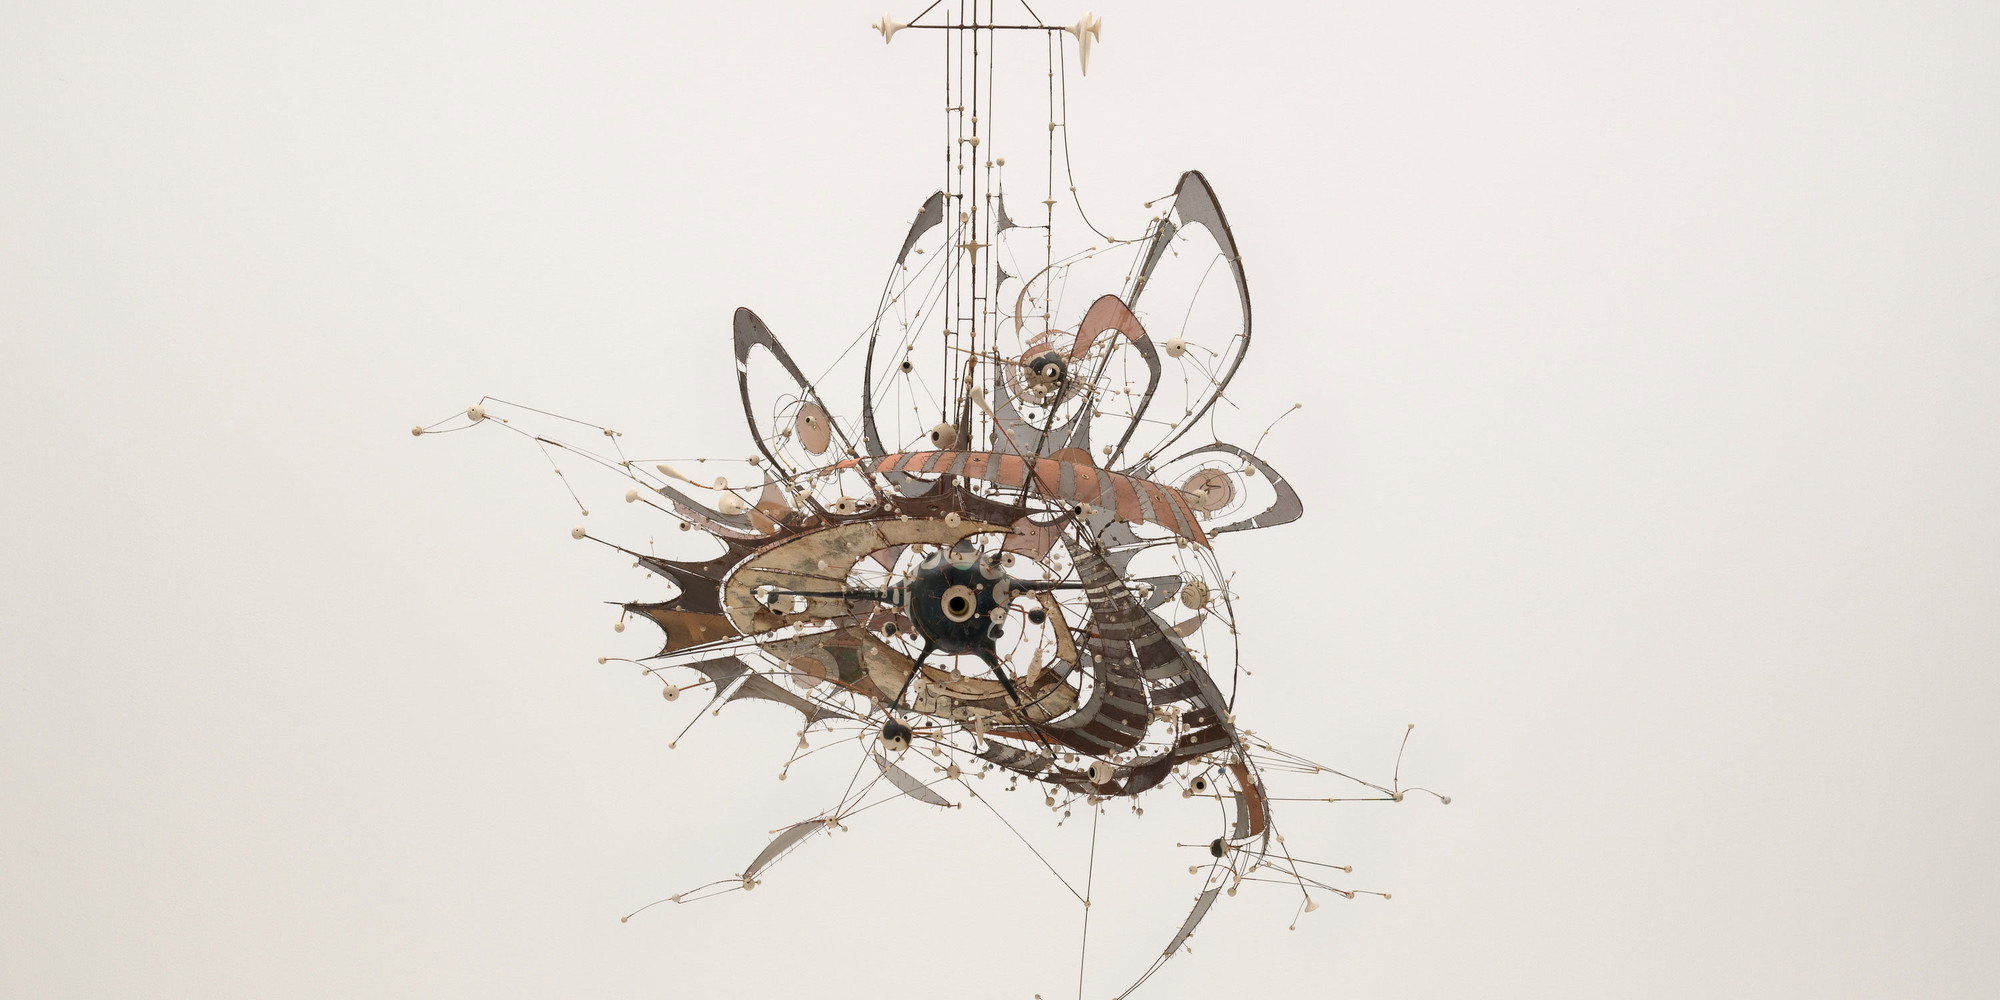 Lee Bontecou. Untitled. 1980–98. Welded steel, porcelain, wire mesh, canvas, grommets, and wire, 7 x 8 x 6&#39; (213.4 x 243.8 x 182.9 cm). Gift of Philip Johnson (by exchange) and the Nina and Gordon Bunshaft Bequest Fund. © 2017 Lee Bontecou. Photo: Jonathan Muzikar